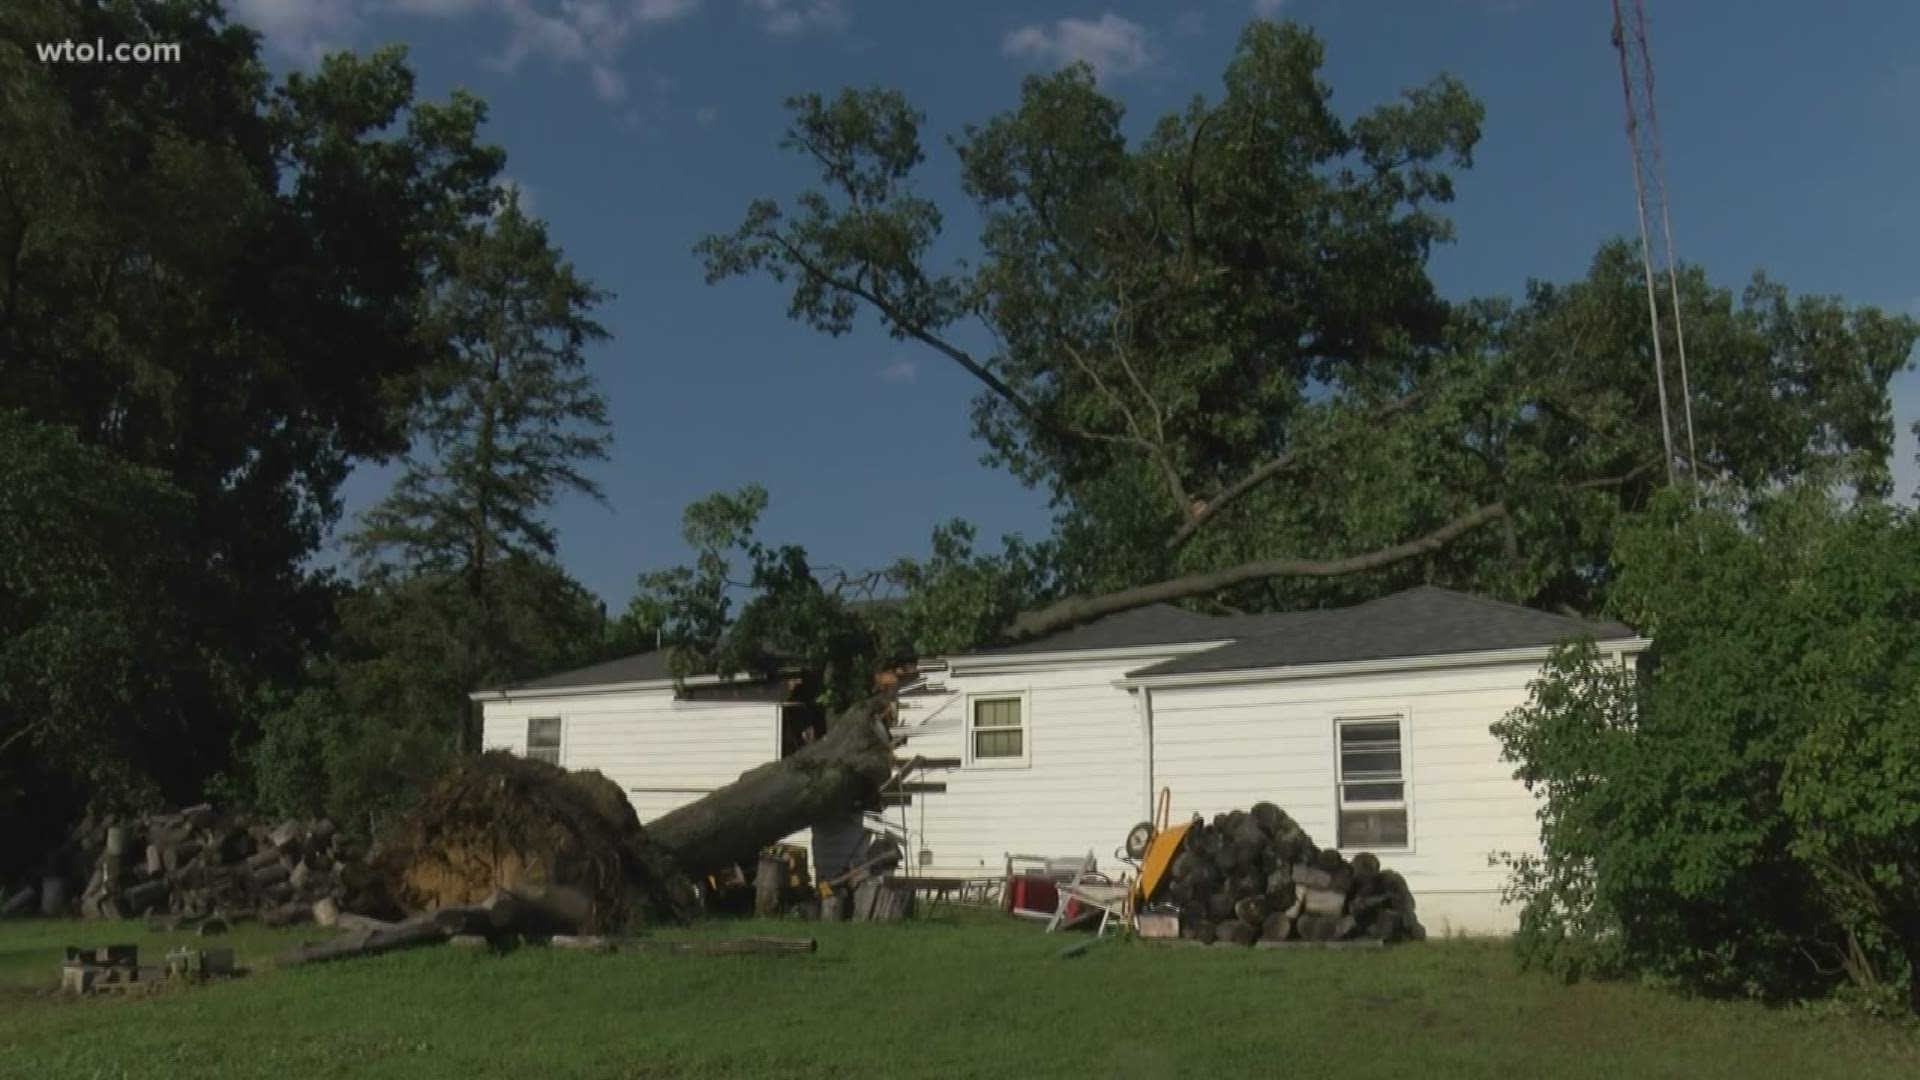 Monday's quick storm has some people in the dark and several houses in Sylvania were hit by large trees.